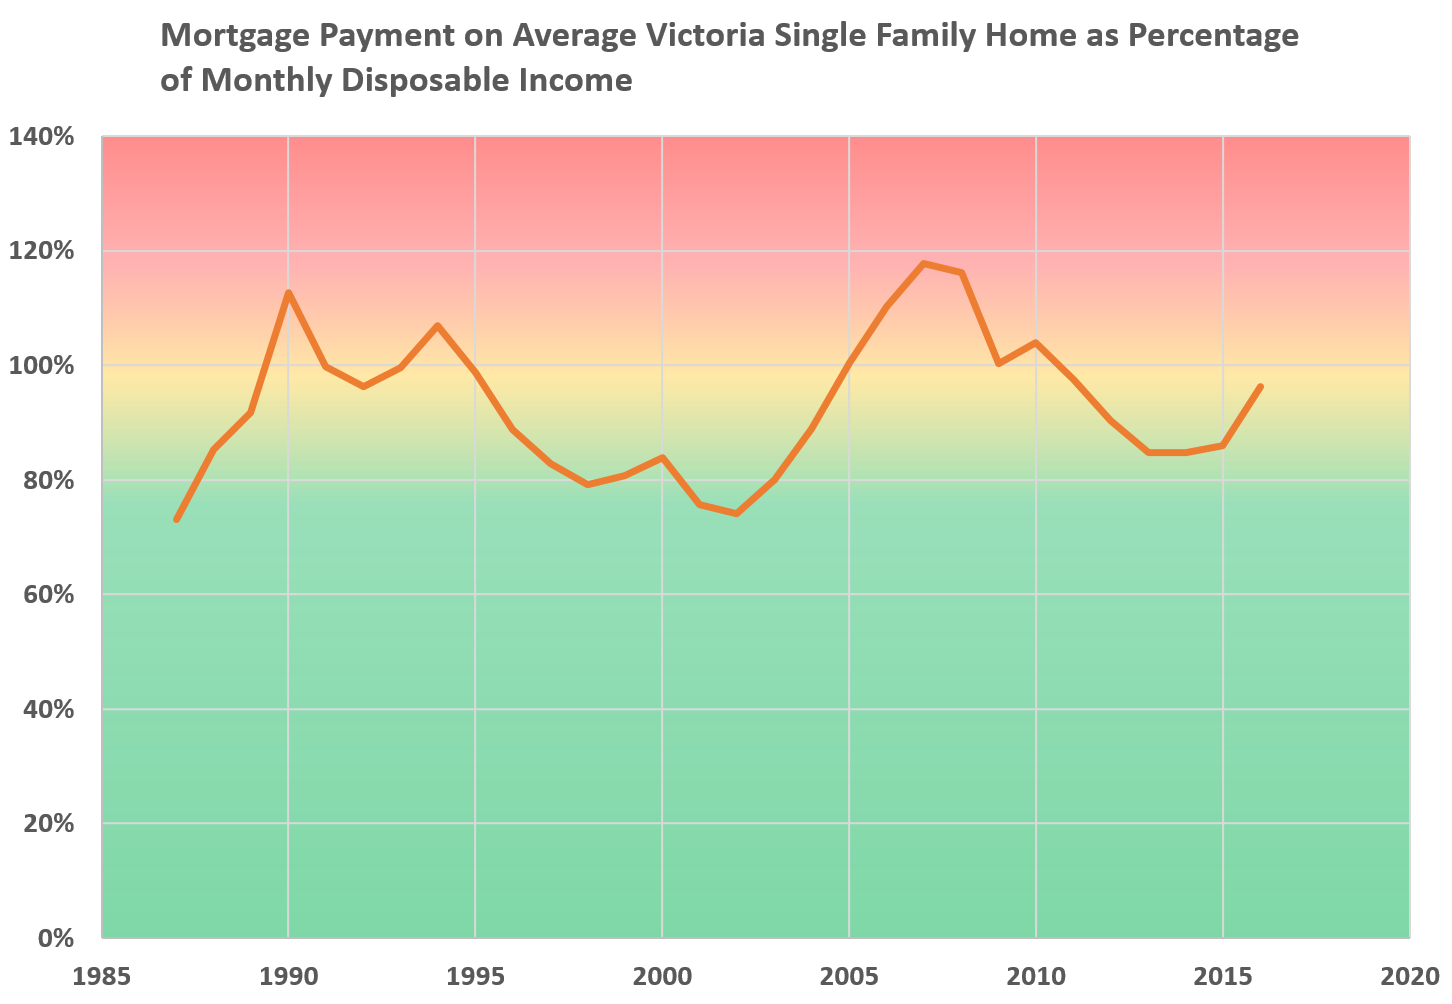 disp_income_mortgage-1.png